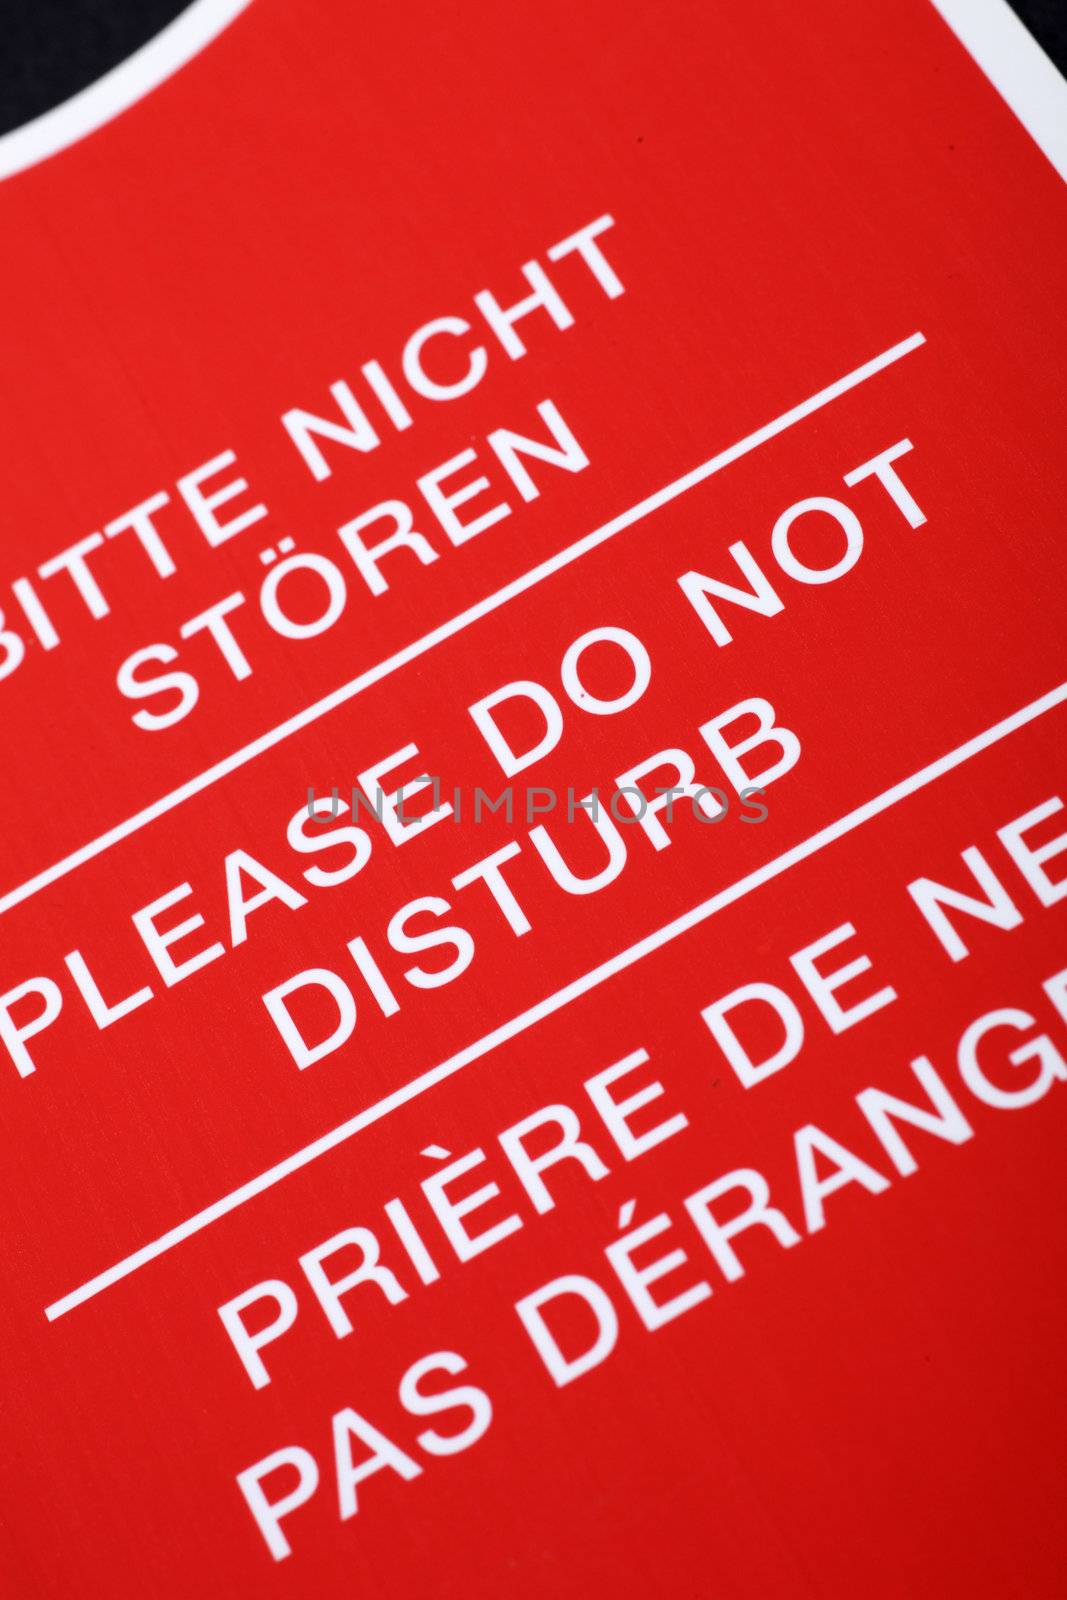 "Do not disturb!" sign in different languages by Farina6000